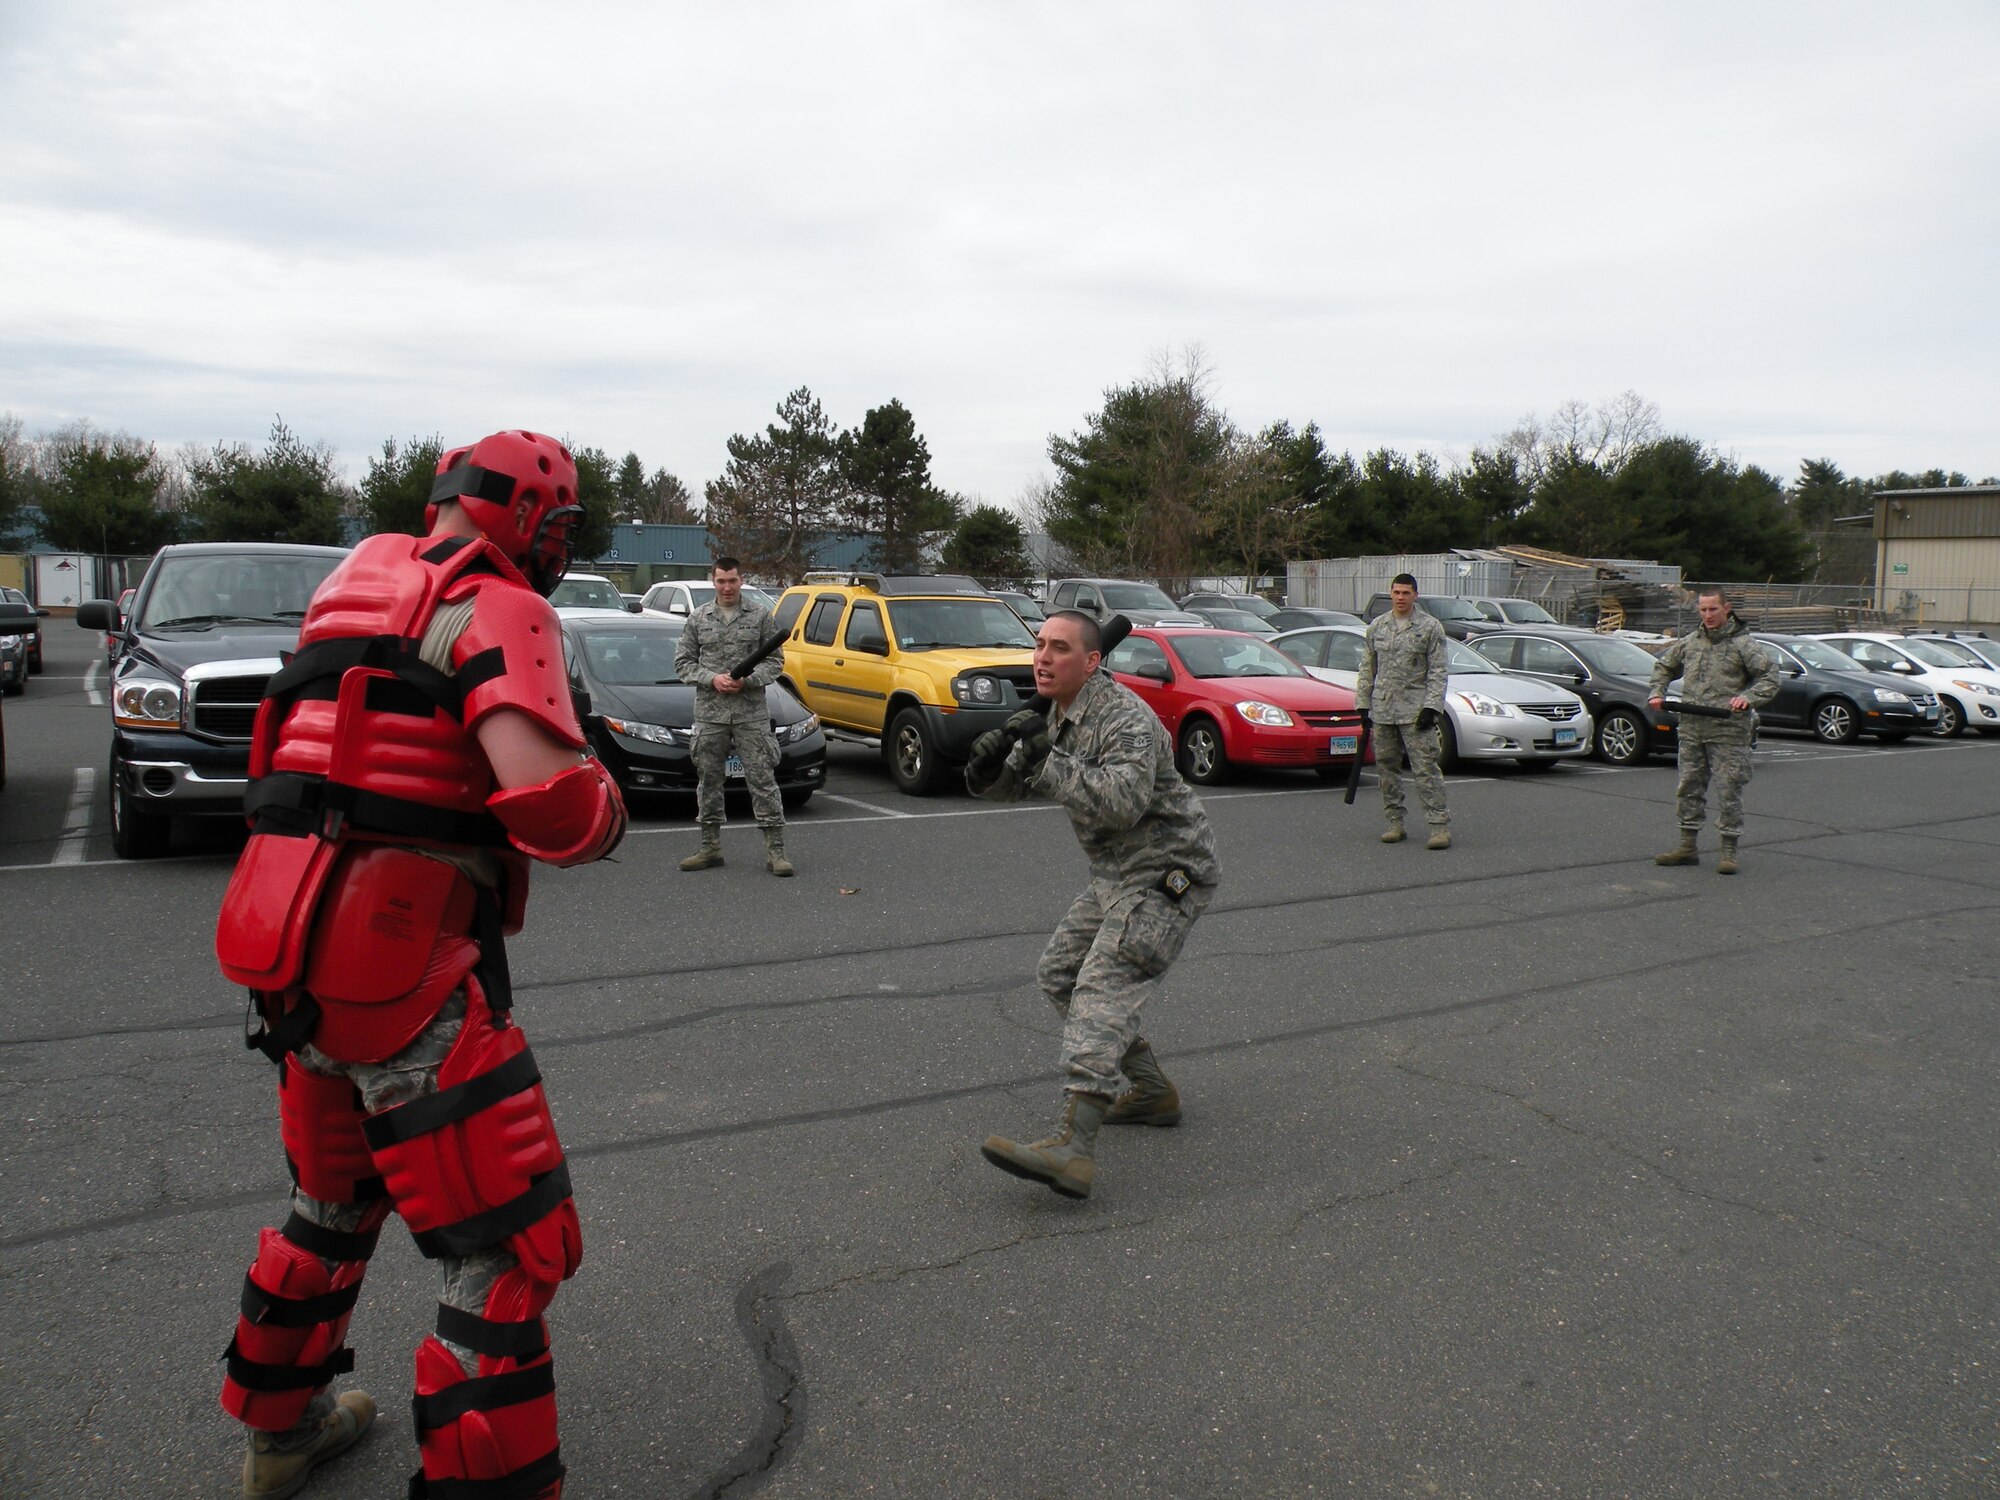 Senior Airman Marvin Perez of the 103rd Security Forces Squadron practices approaching a combative ’hostile’ in a red man suit as part of a training exercise at Bradley Air National Guard Base, East Granby, Conn. in 2013. (Photos courtesy of Tech. Sgt. Jessica Roy)